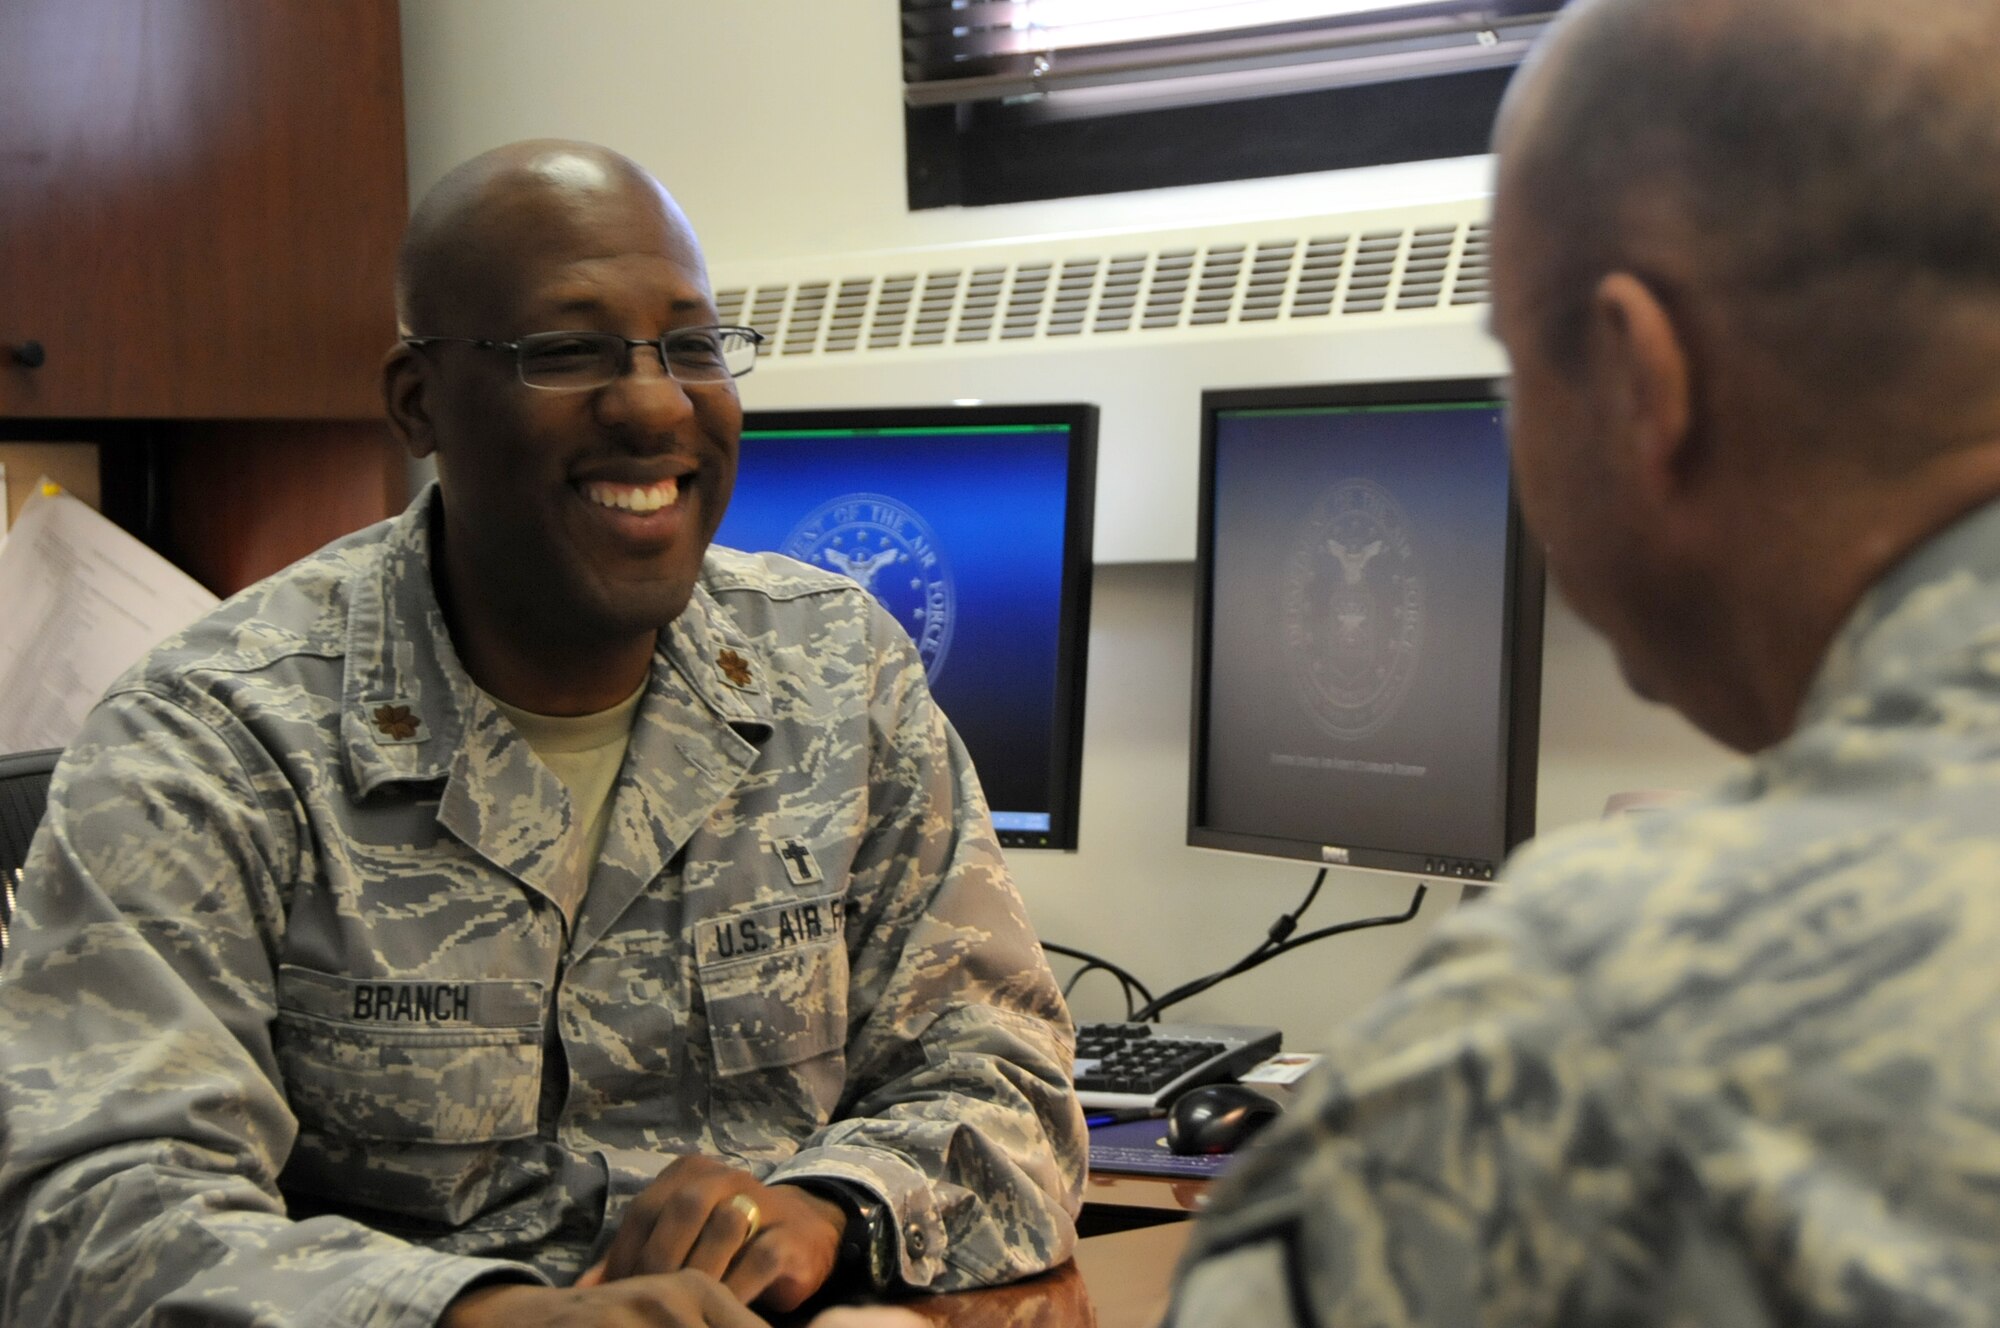 Chaplain (Maj.) Joseph Branch of the 178th Wing speaks with an Airman in his office Sept. 23, 2014. Branch is a full-time chaplain for the wing and provides a myriad of services including grief counseling, relationship counseling, substance abuse awareness and prevention, suicide awareness and prevention, and freedom of religion. (Ohio Air National Guard photo by Senior Master Sgt. Joseph Stahl/Released)